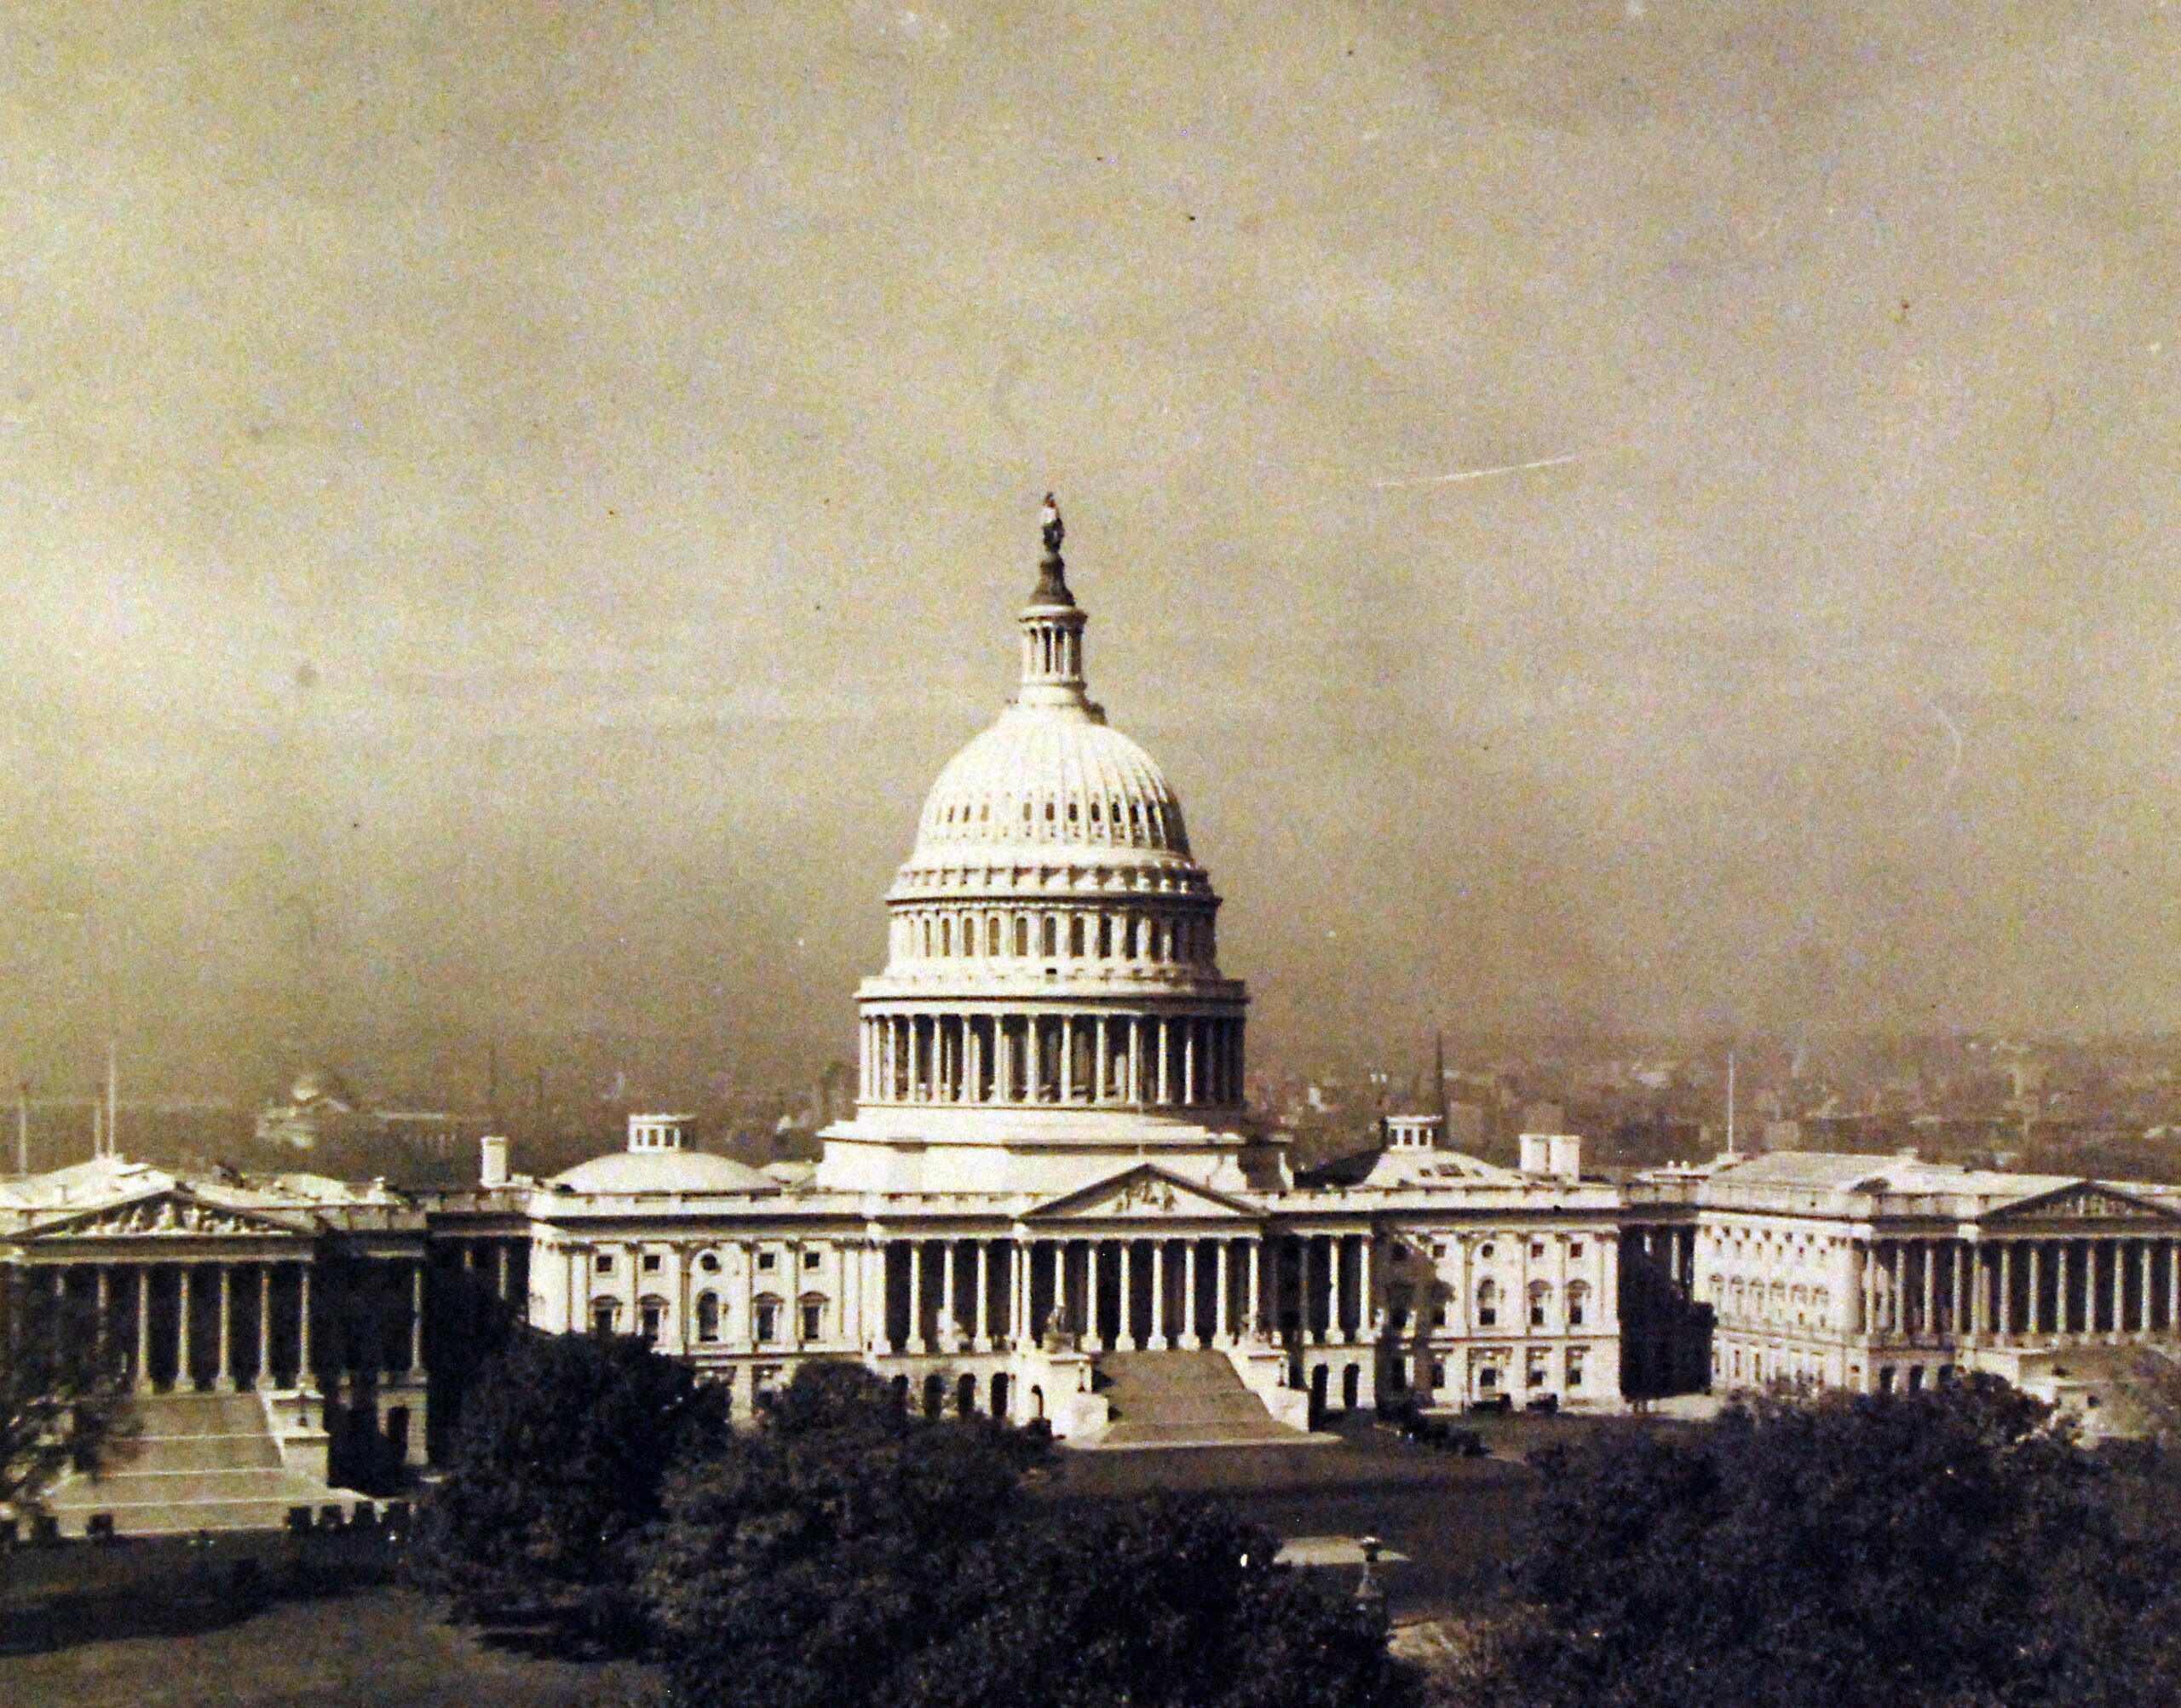 til-skogrand-80-G-1025323-United-States-Capitol-Washington-D.C.-1926.-U.S.-Navy-photograph-now-in-the-collections-of-the-National-Archives.-2017.02.28..